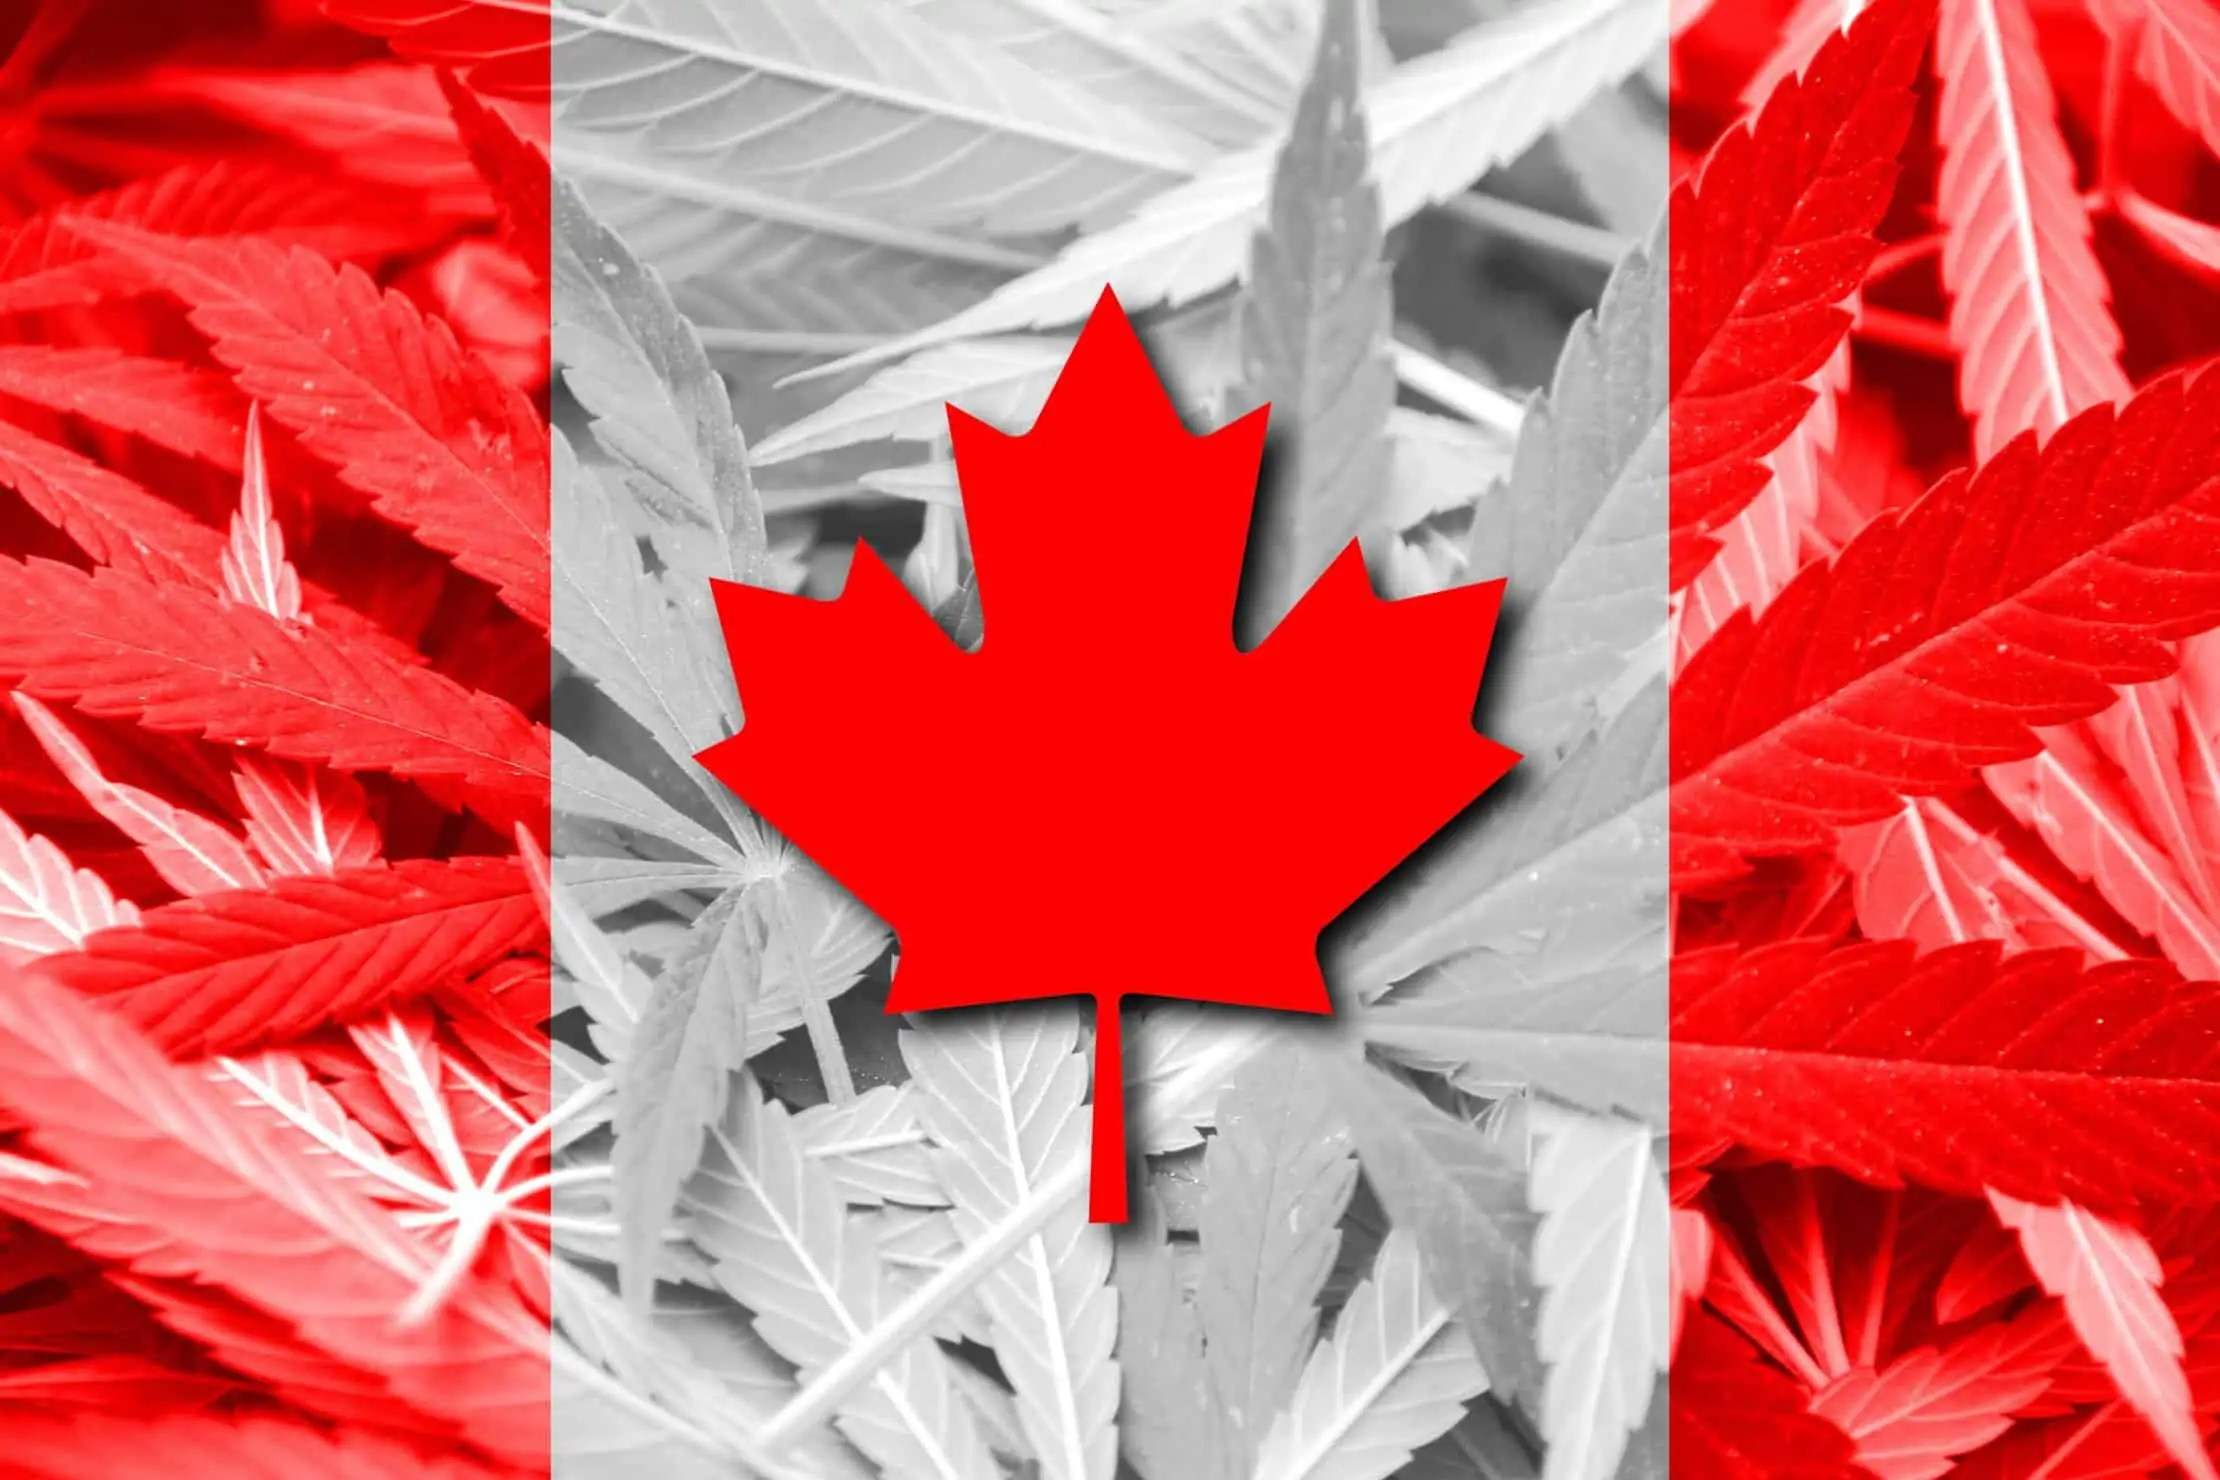 Here’s What To Expect From Legalized Cannabis in Canada